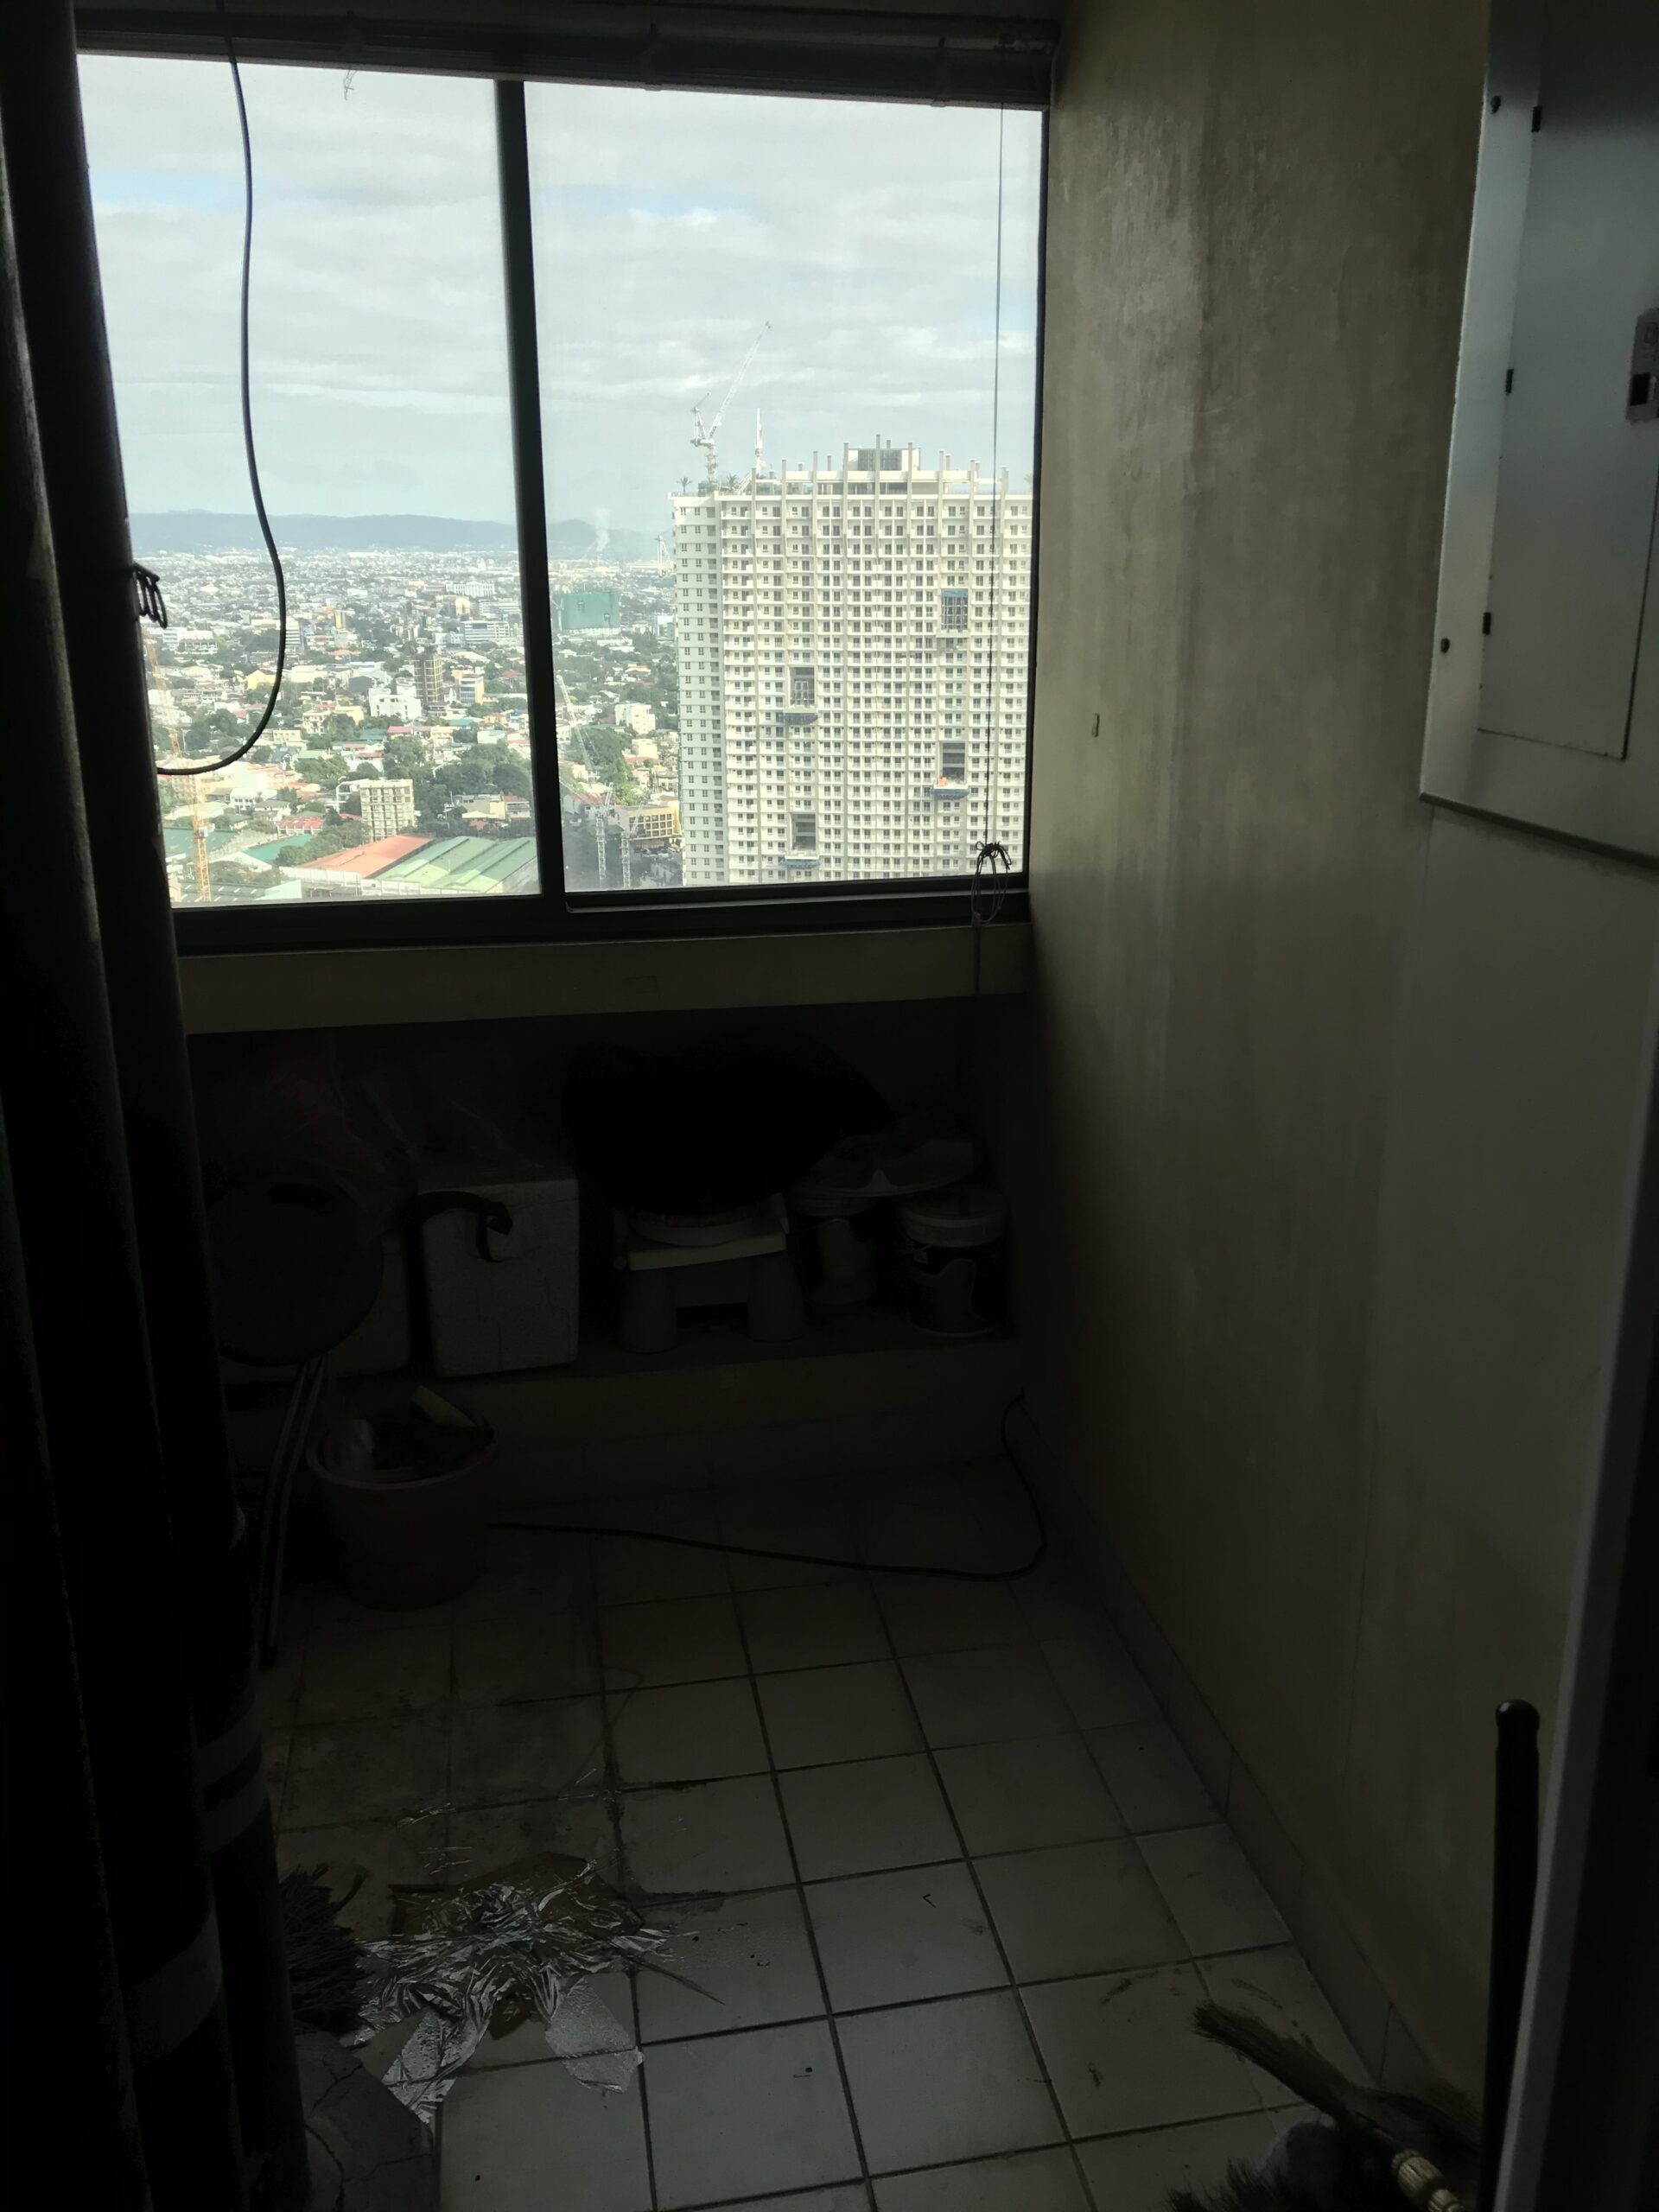 For Sale! 2 BR Condo unit in Pioneer Highlands, Mandaluyong